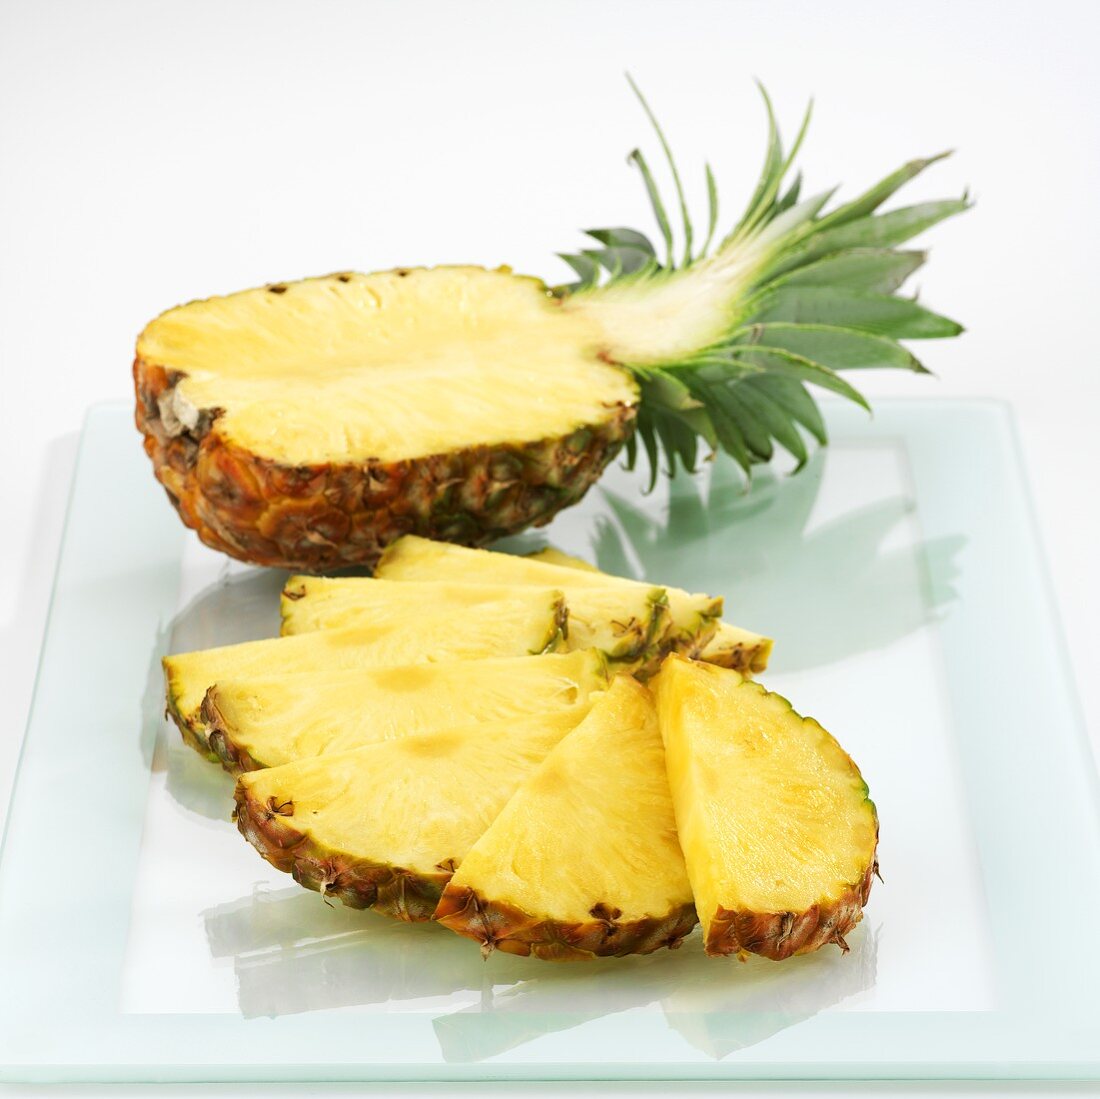 Half a pineapple and pineapple slices